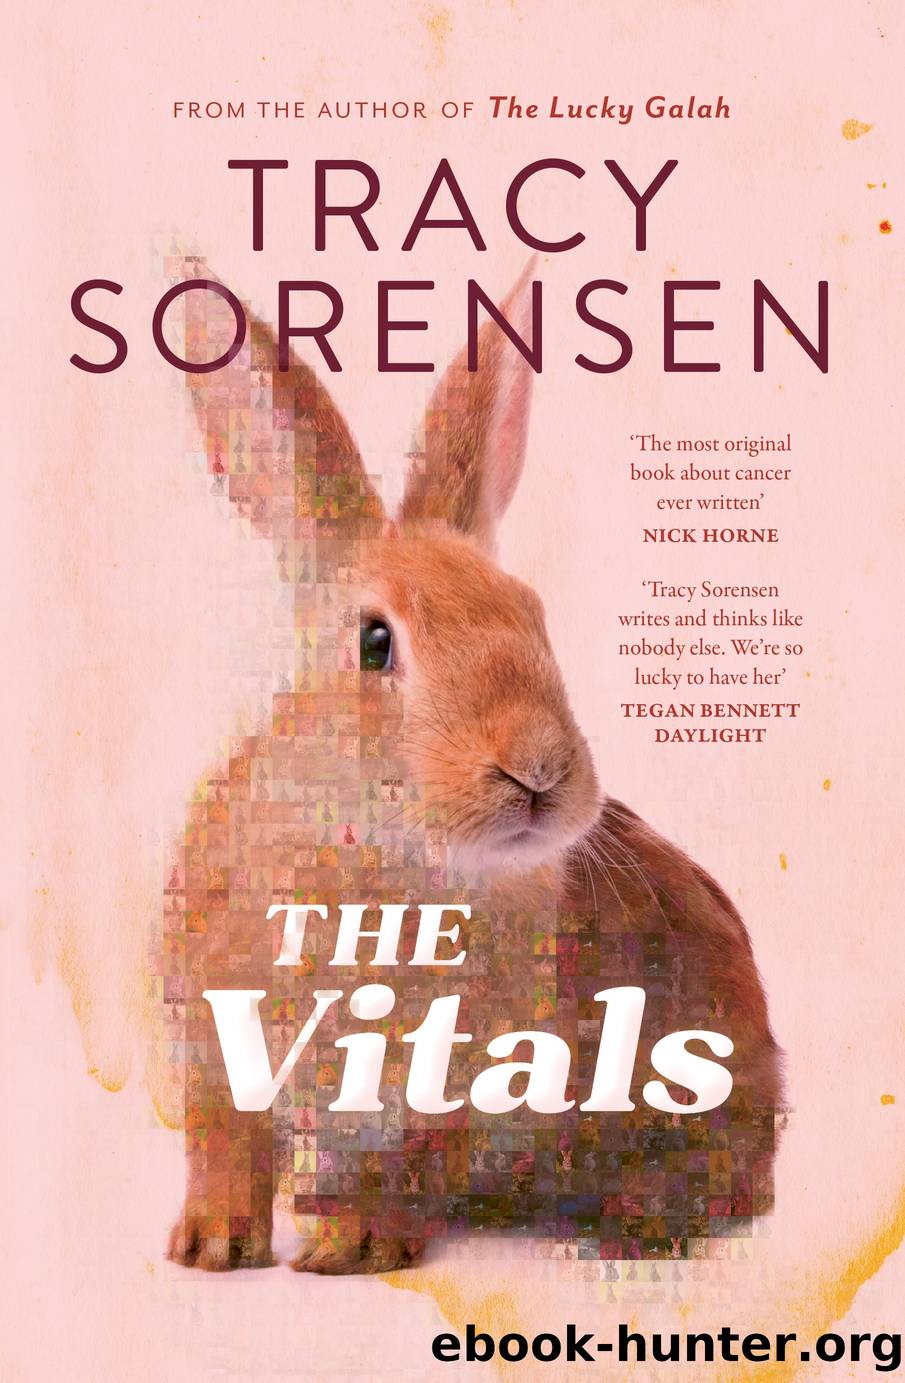 The Vitals by Tracy Sorensen